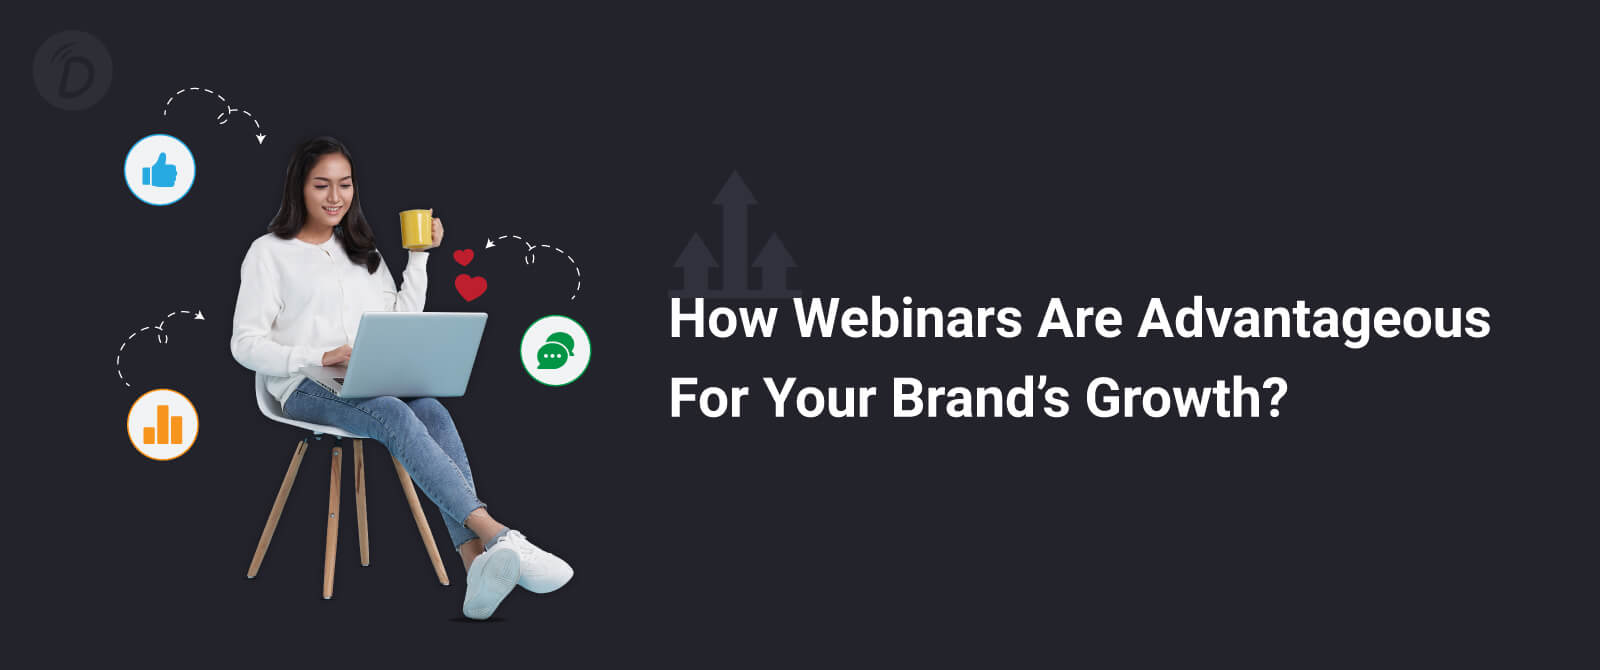 How Webinars are Advantageous For Your Brand’s Growth?